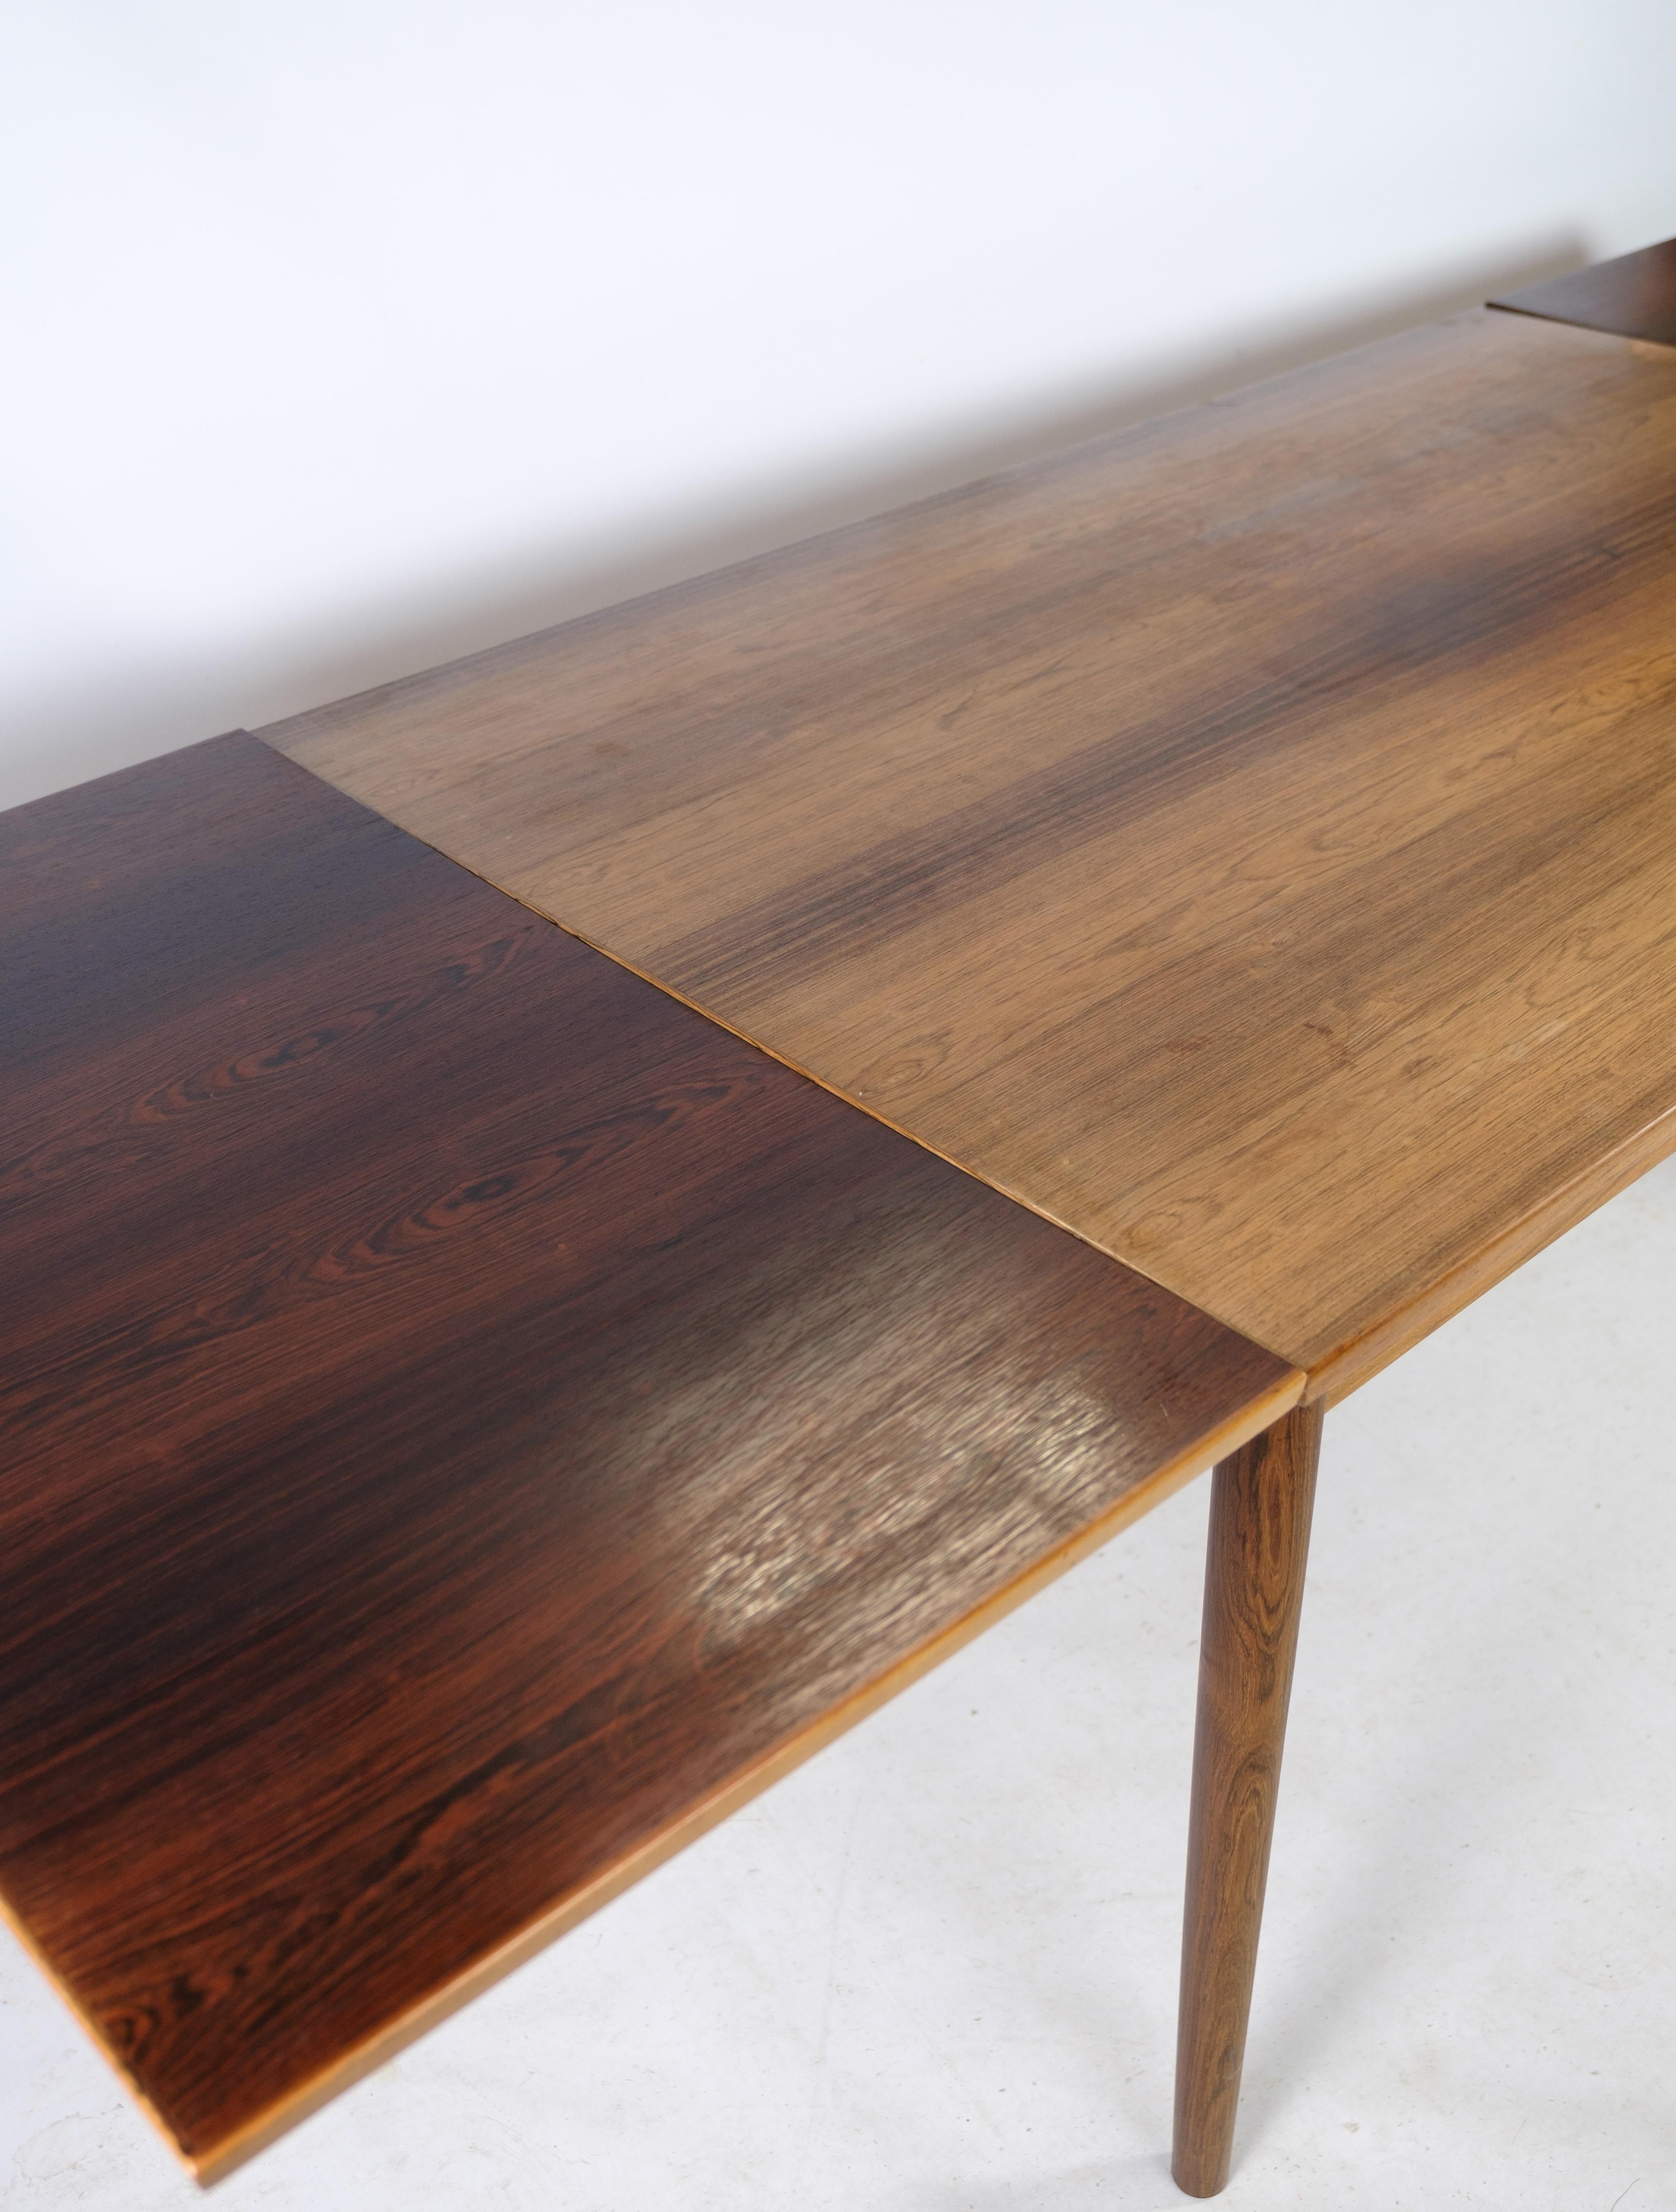 Mid-20th Century Dining Table, Danish Design, Rosewood, Dutch Extensions, 1960s For Sale